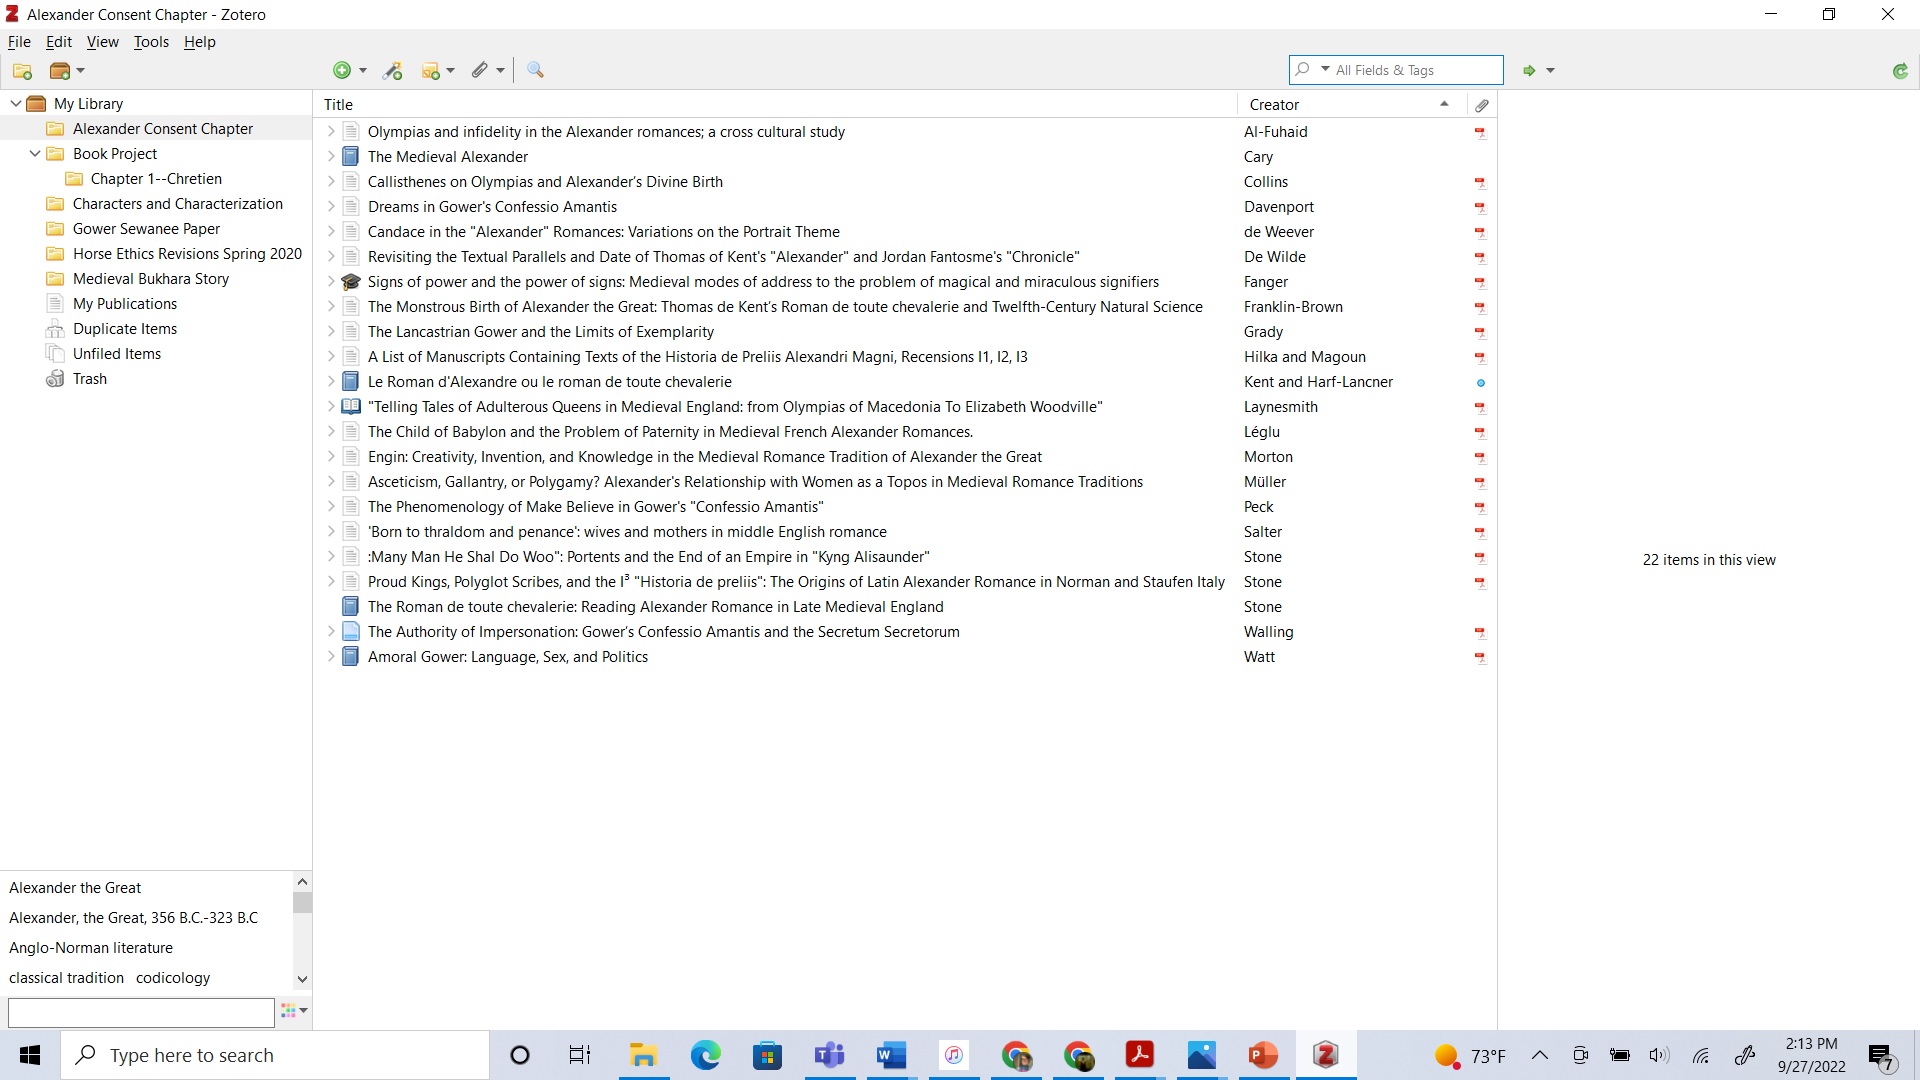 A screenshot of a library in Zotero